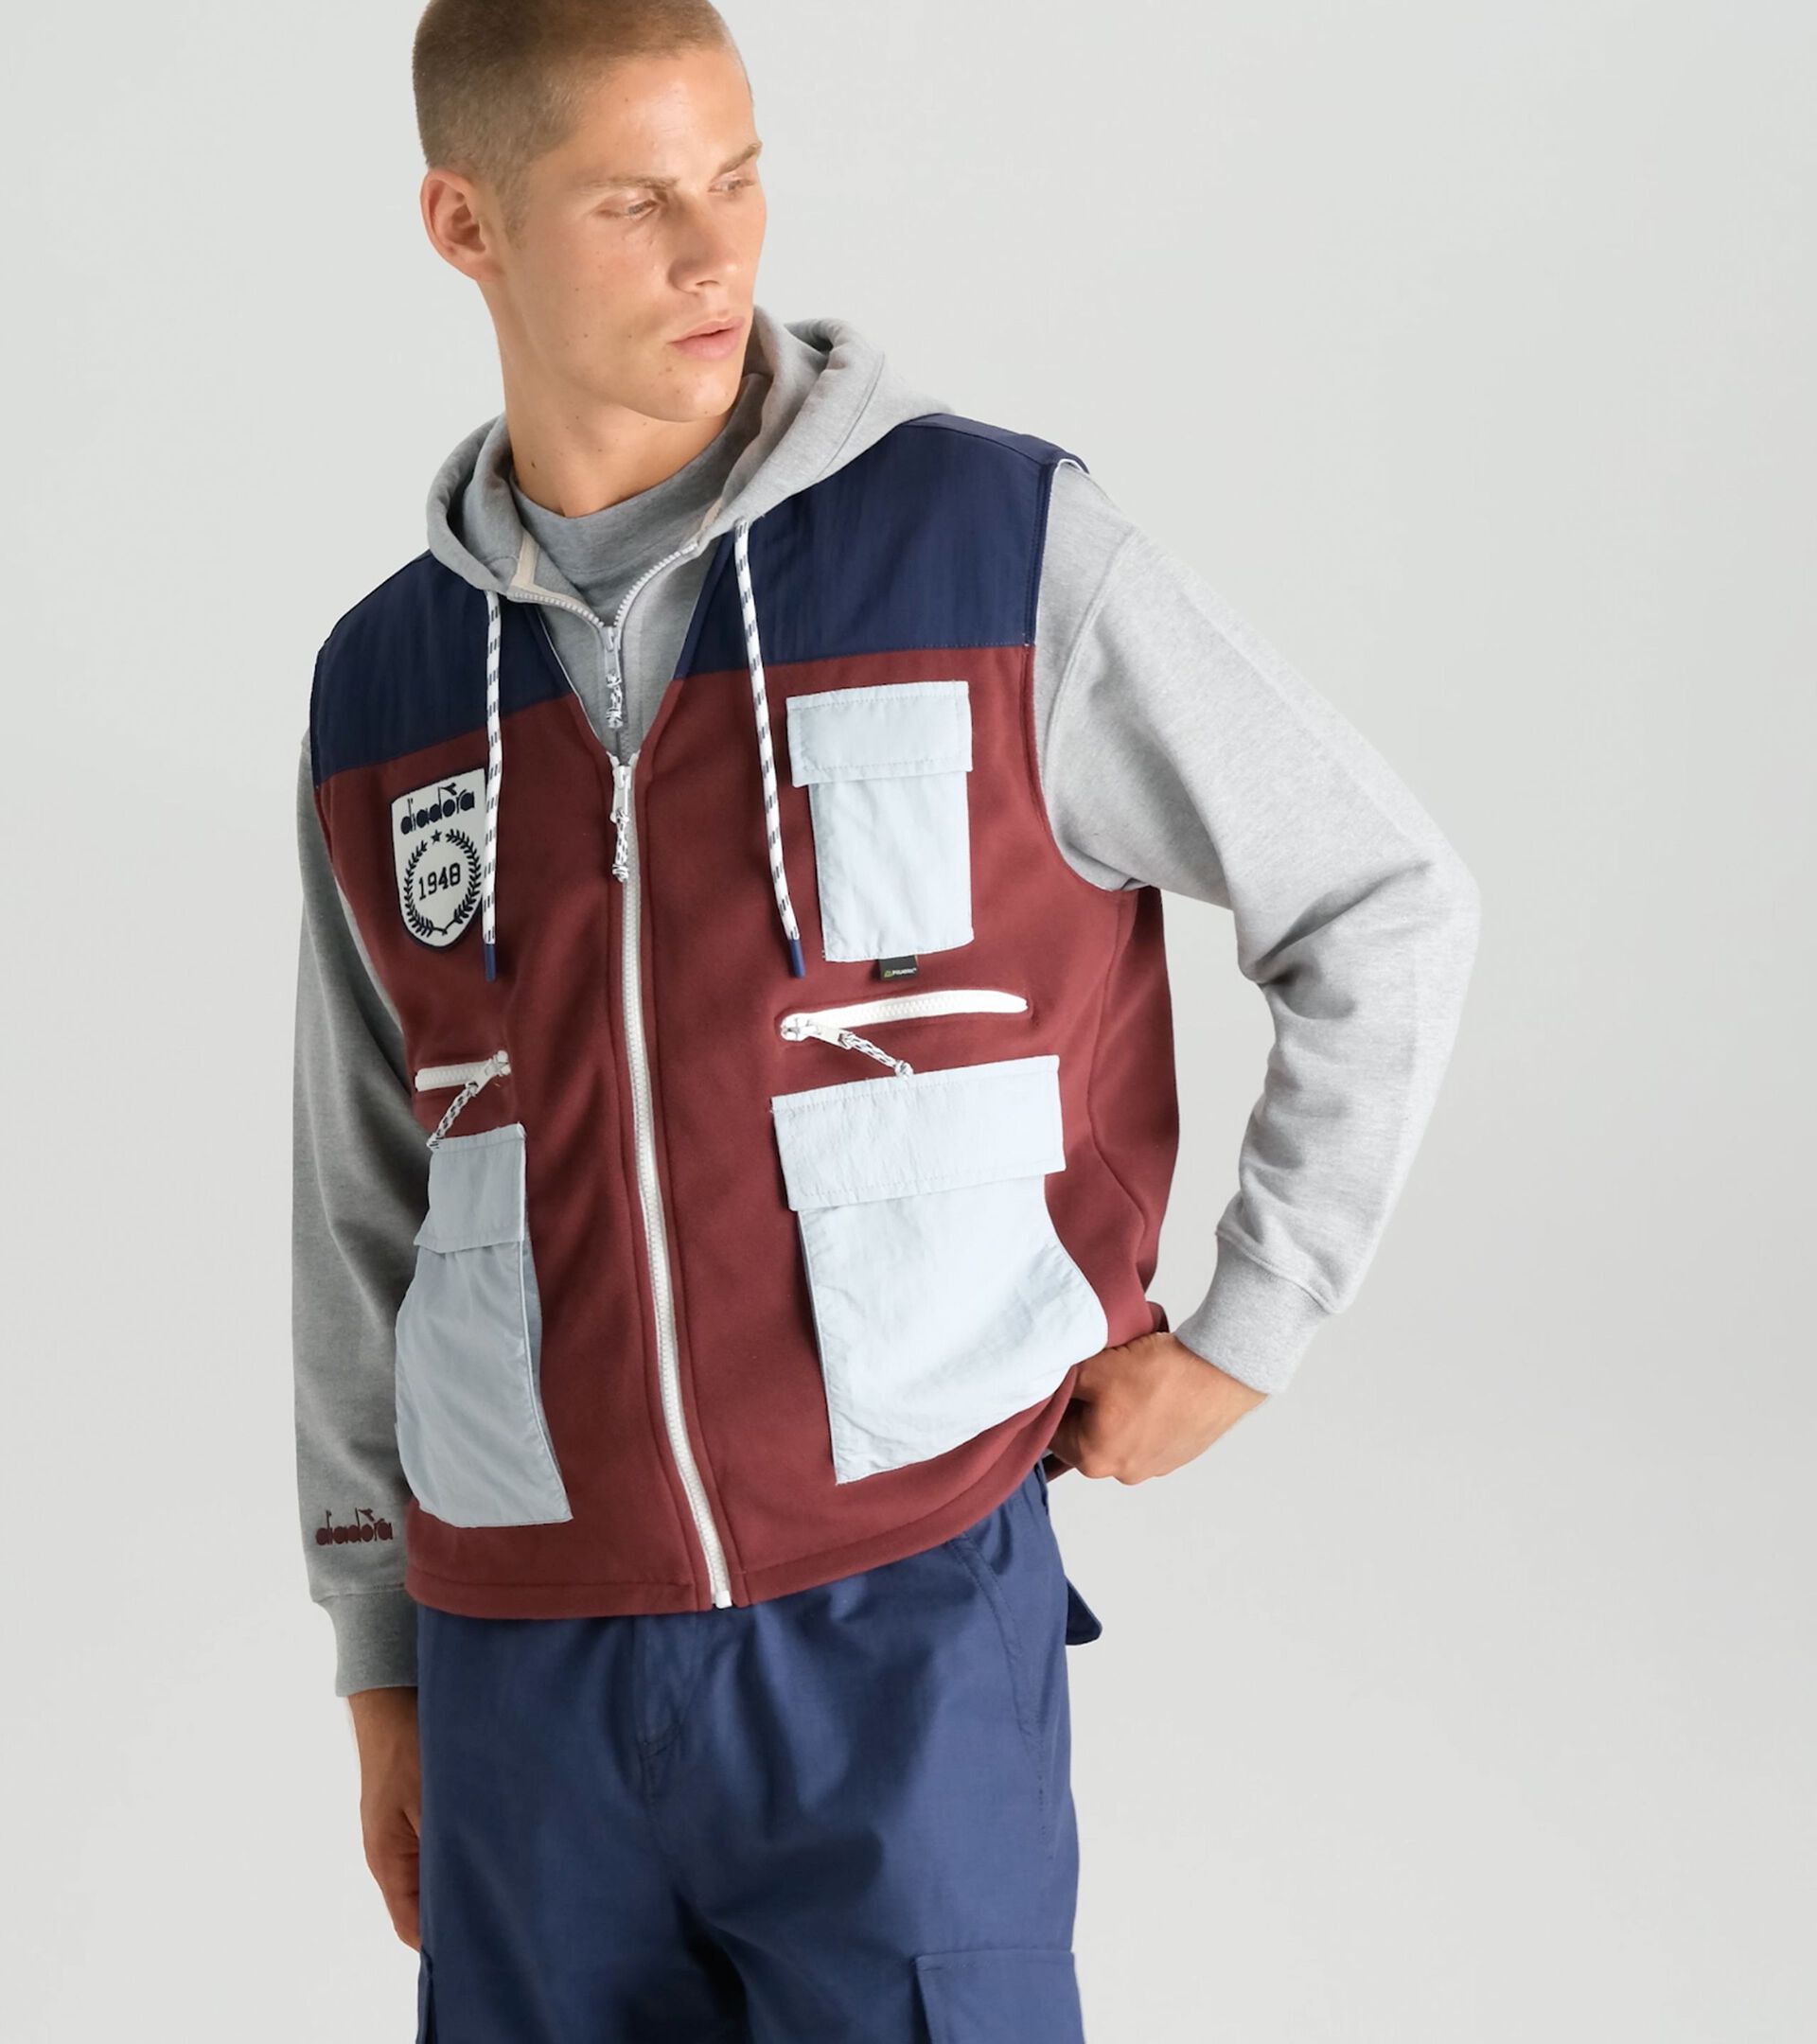 Vest with pockets - Made in italy - Gender Neutral VEST LEGACY MALAGA RD/OCEANA/HIGH RISE - Diadora